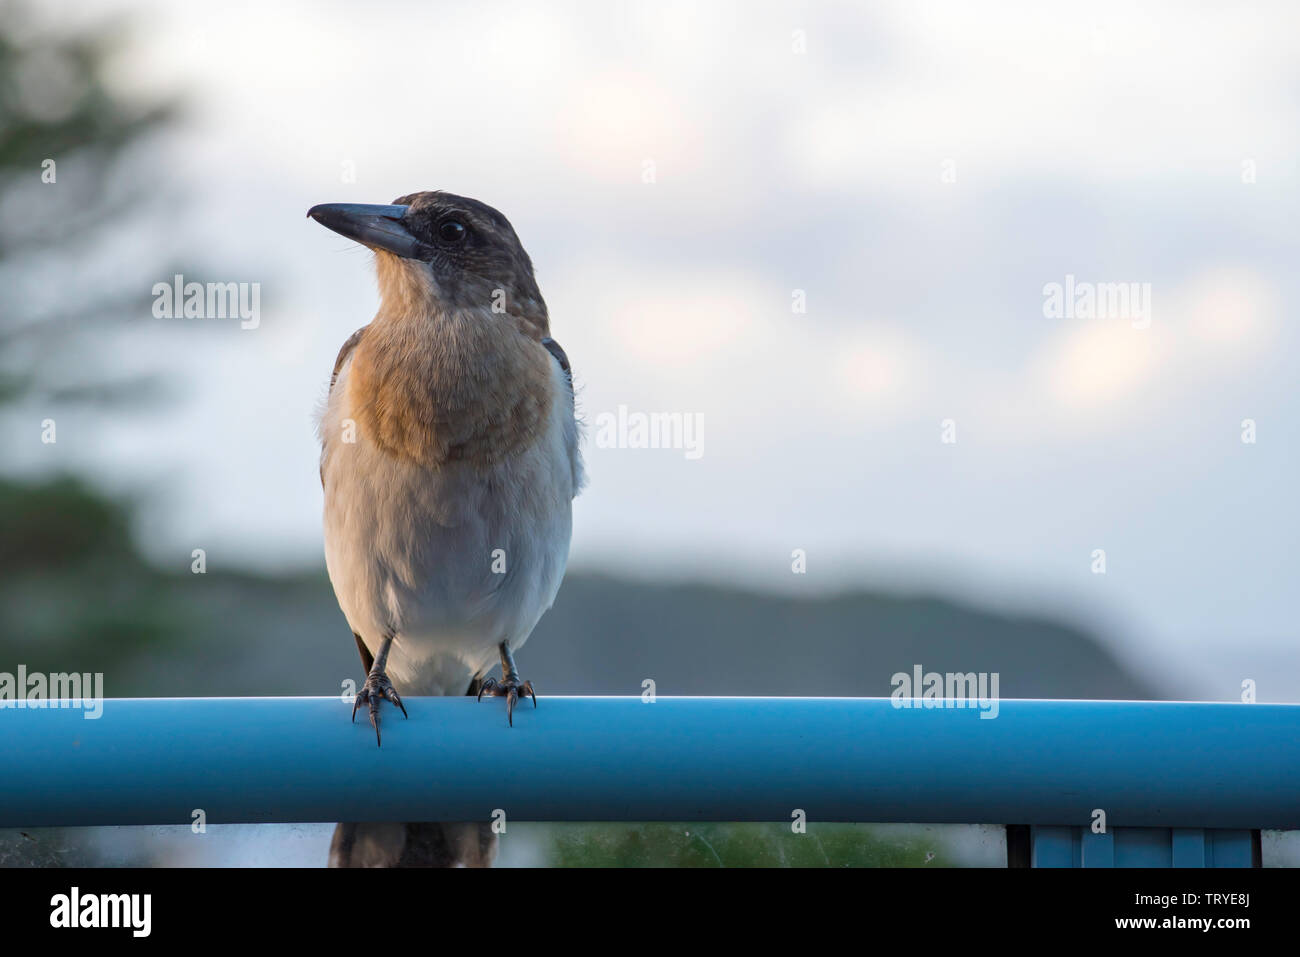 An Australian Silver Backed Butcherbird (Cracticus argenteus) is comfortable up close and sitting on a balcony rail Stock Photo